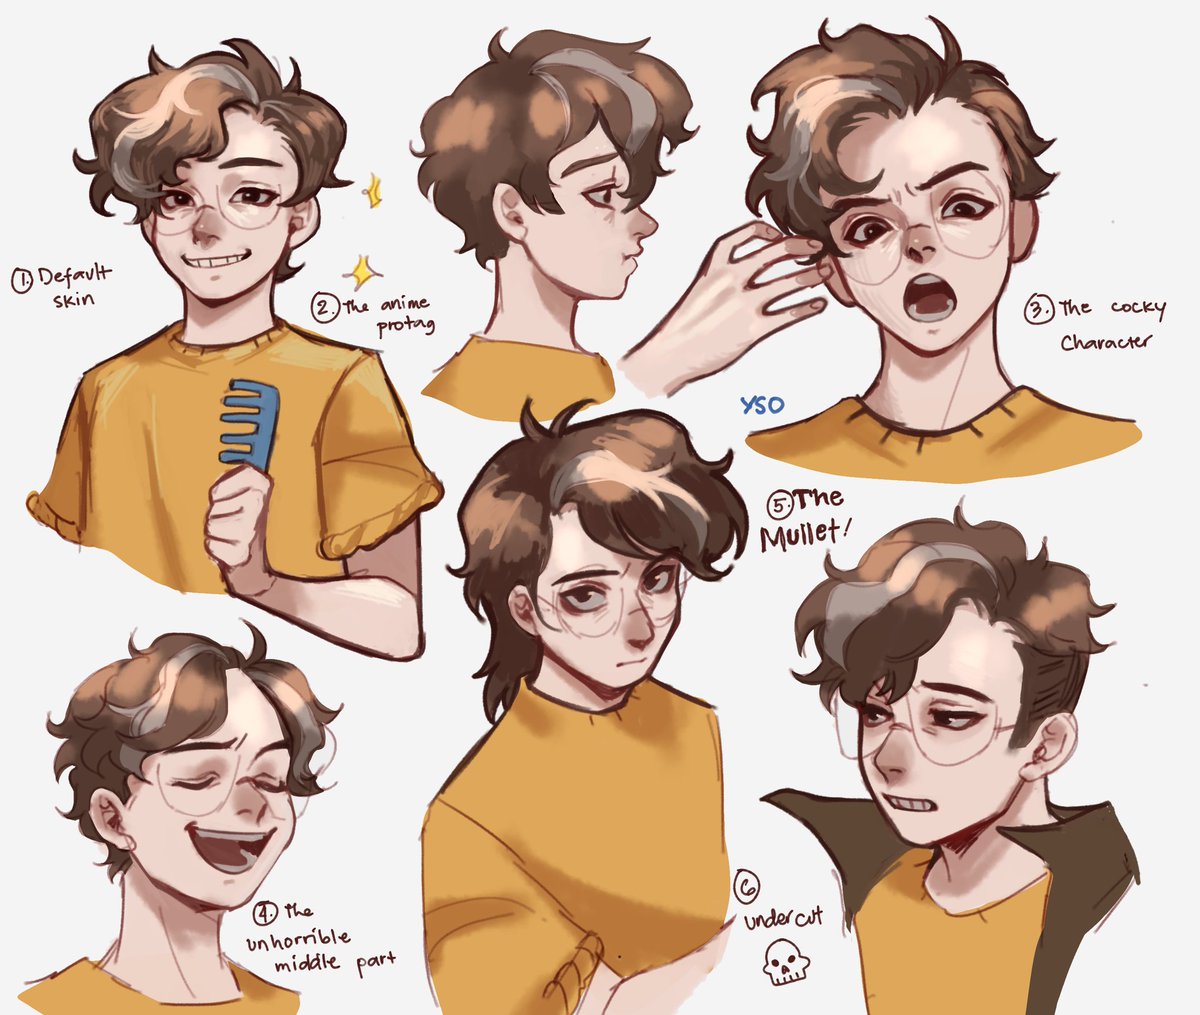 wilbur x haircut (too lazy to finish),,, which one do u like the best lol #wilbursootfanart 